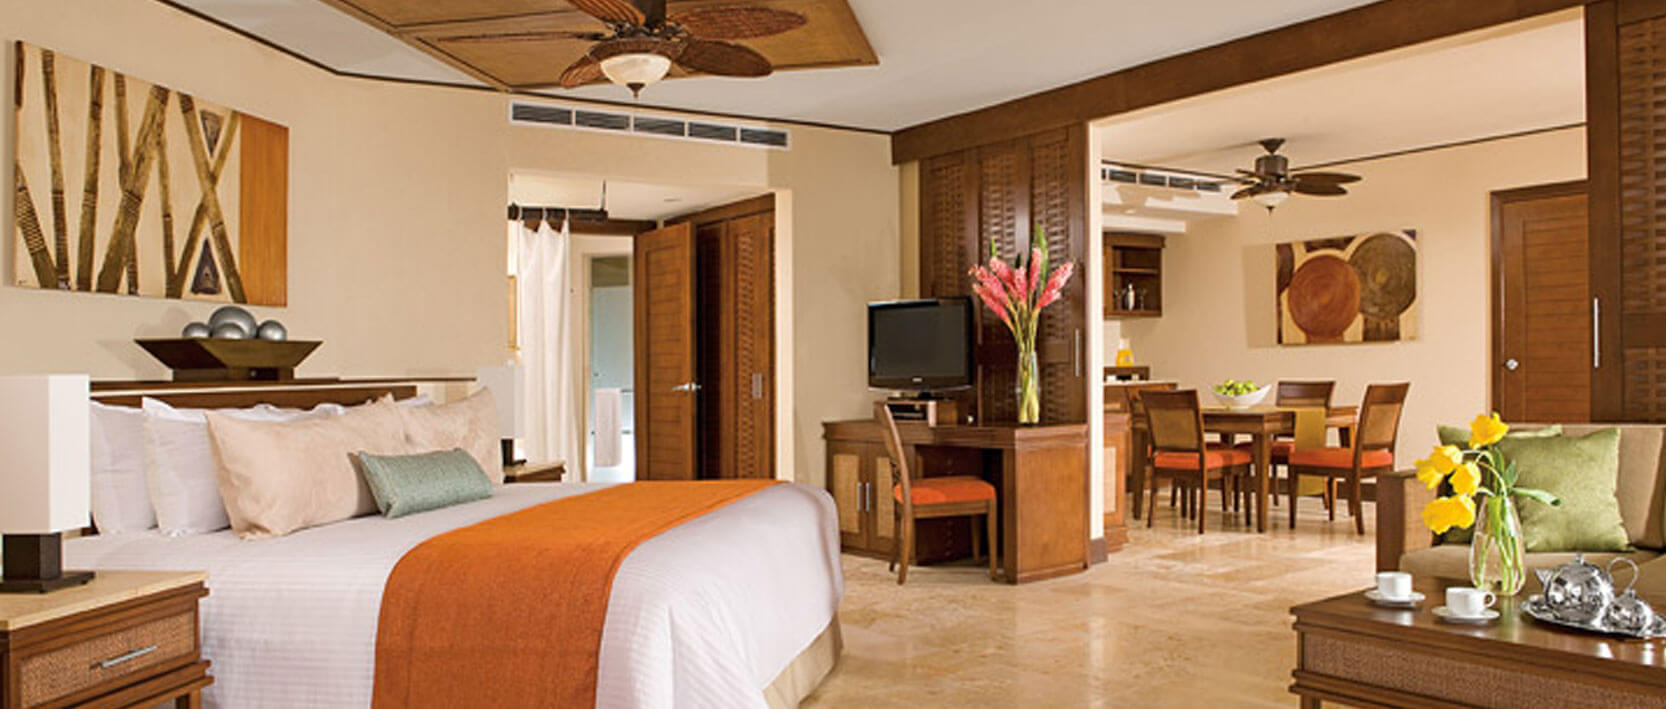 Dreams Riviera Cancun Resort Accommodations - Preferred Club Master Suite Ocean View